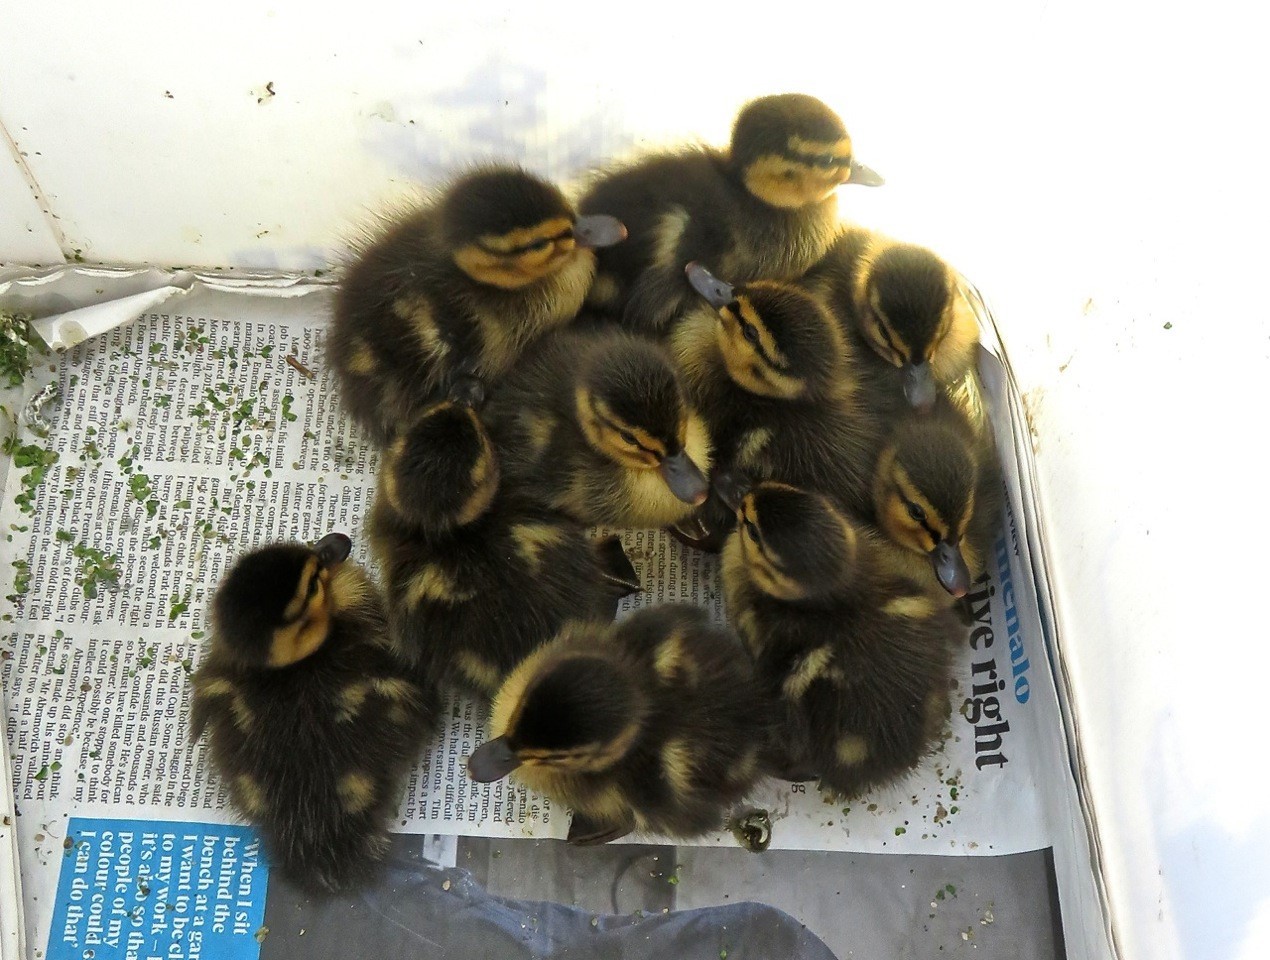 Safe afterr their rescue - the ten ducklings being cared for at Secret World